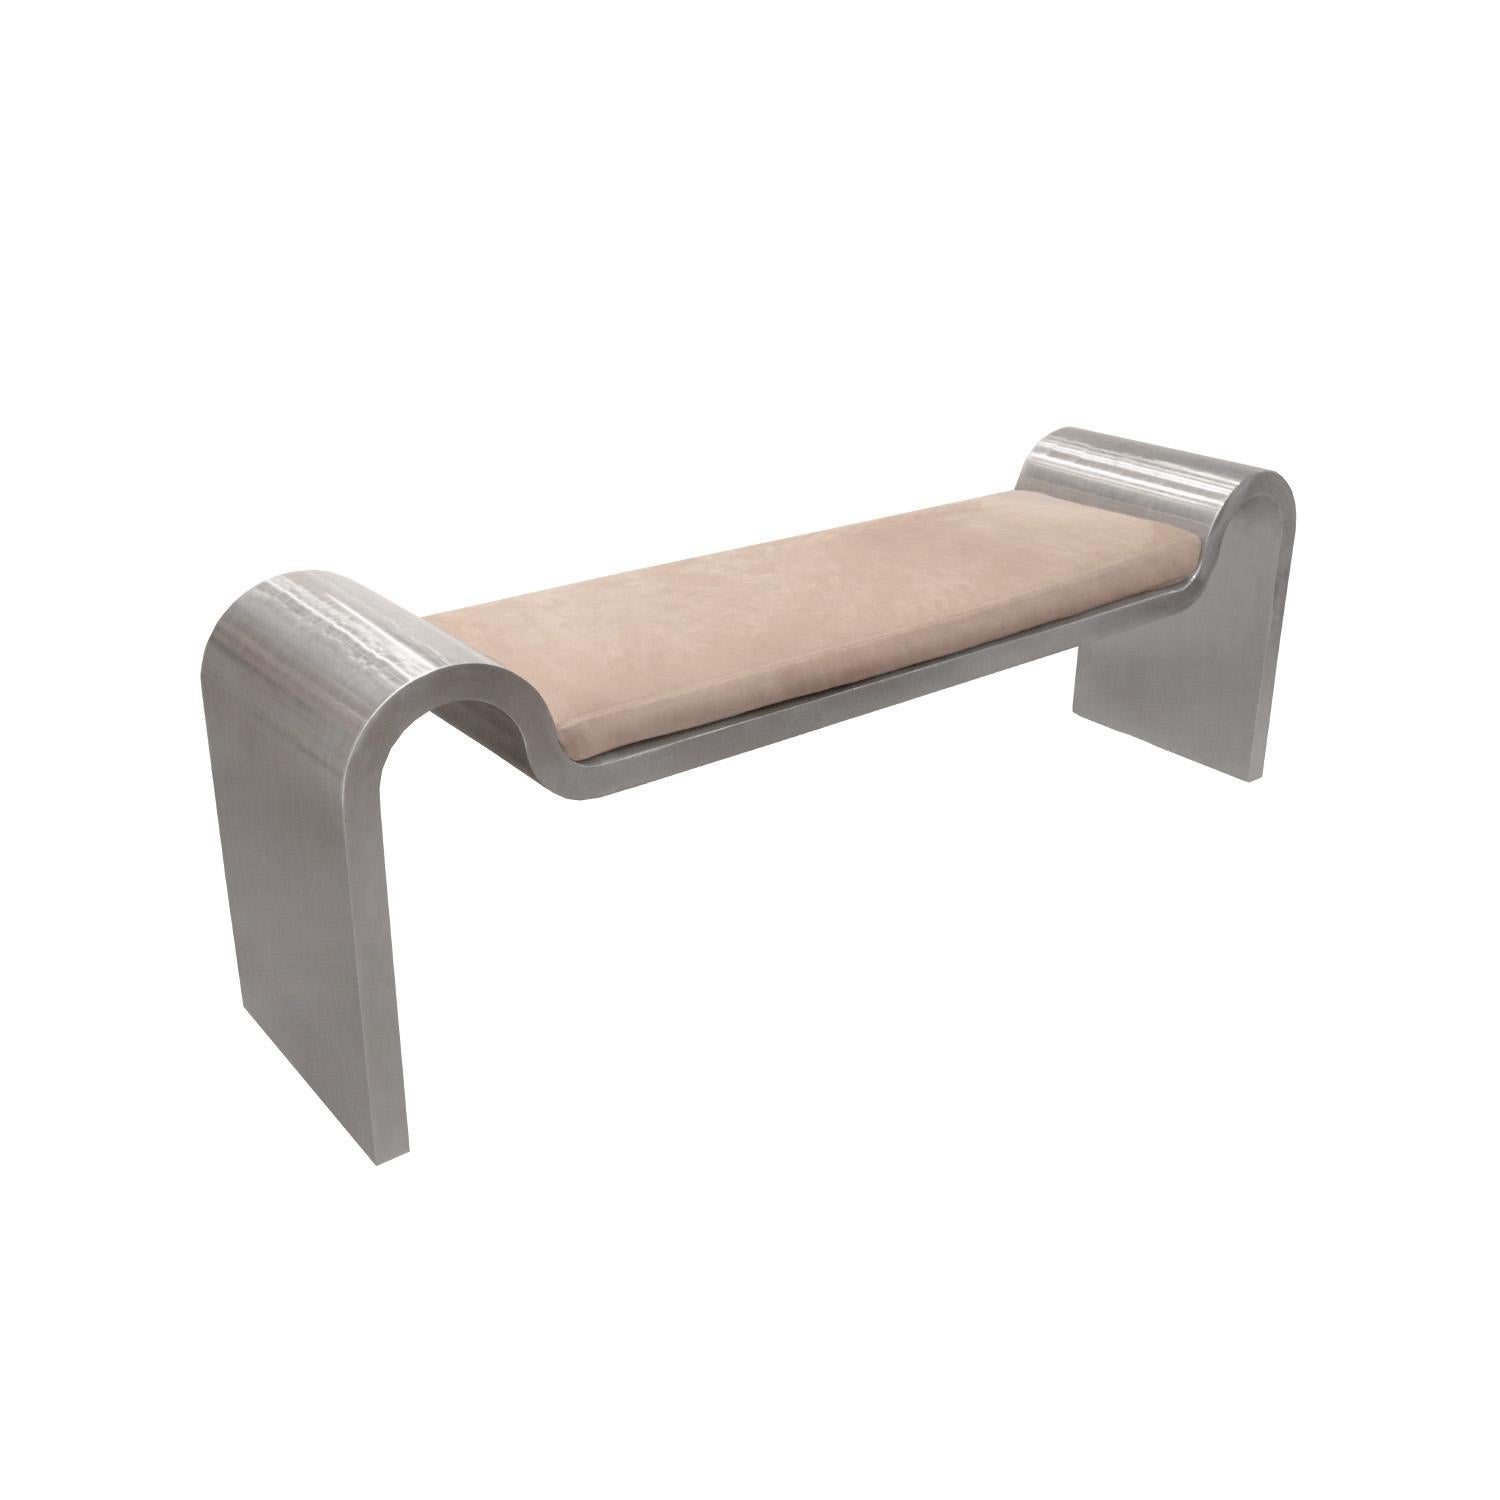 Modern Karl Springer Sculptural Bench in Stainless Steel with Suede Seat Cushion, 1980s